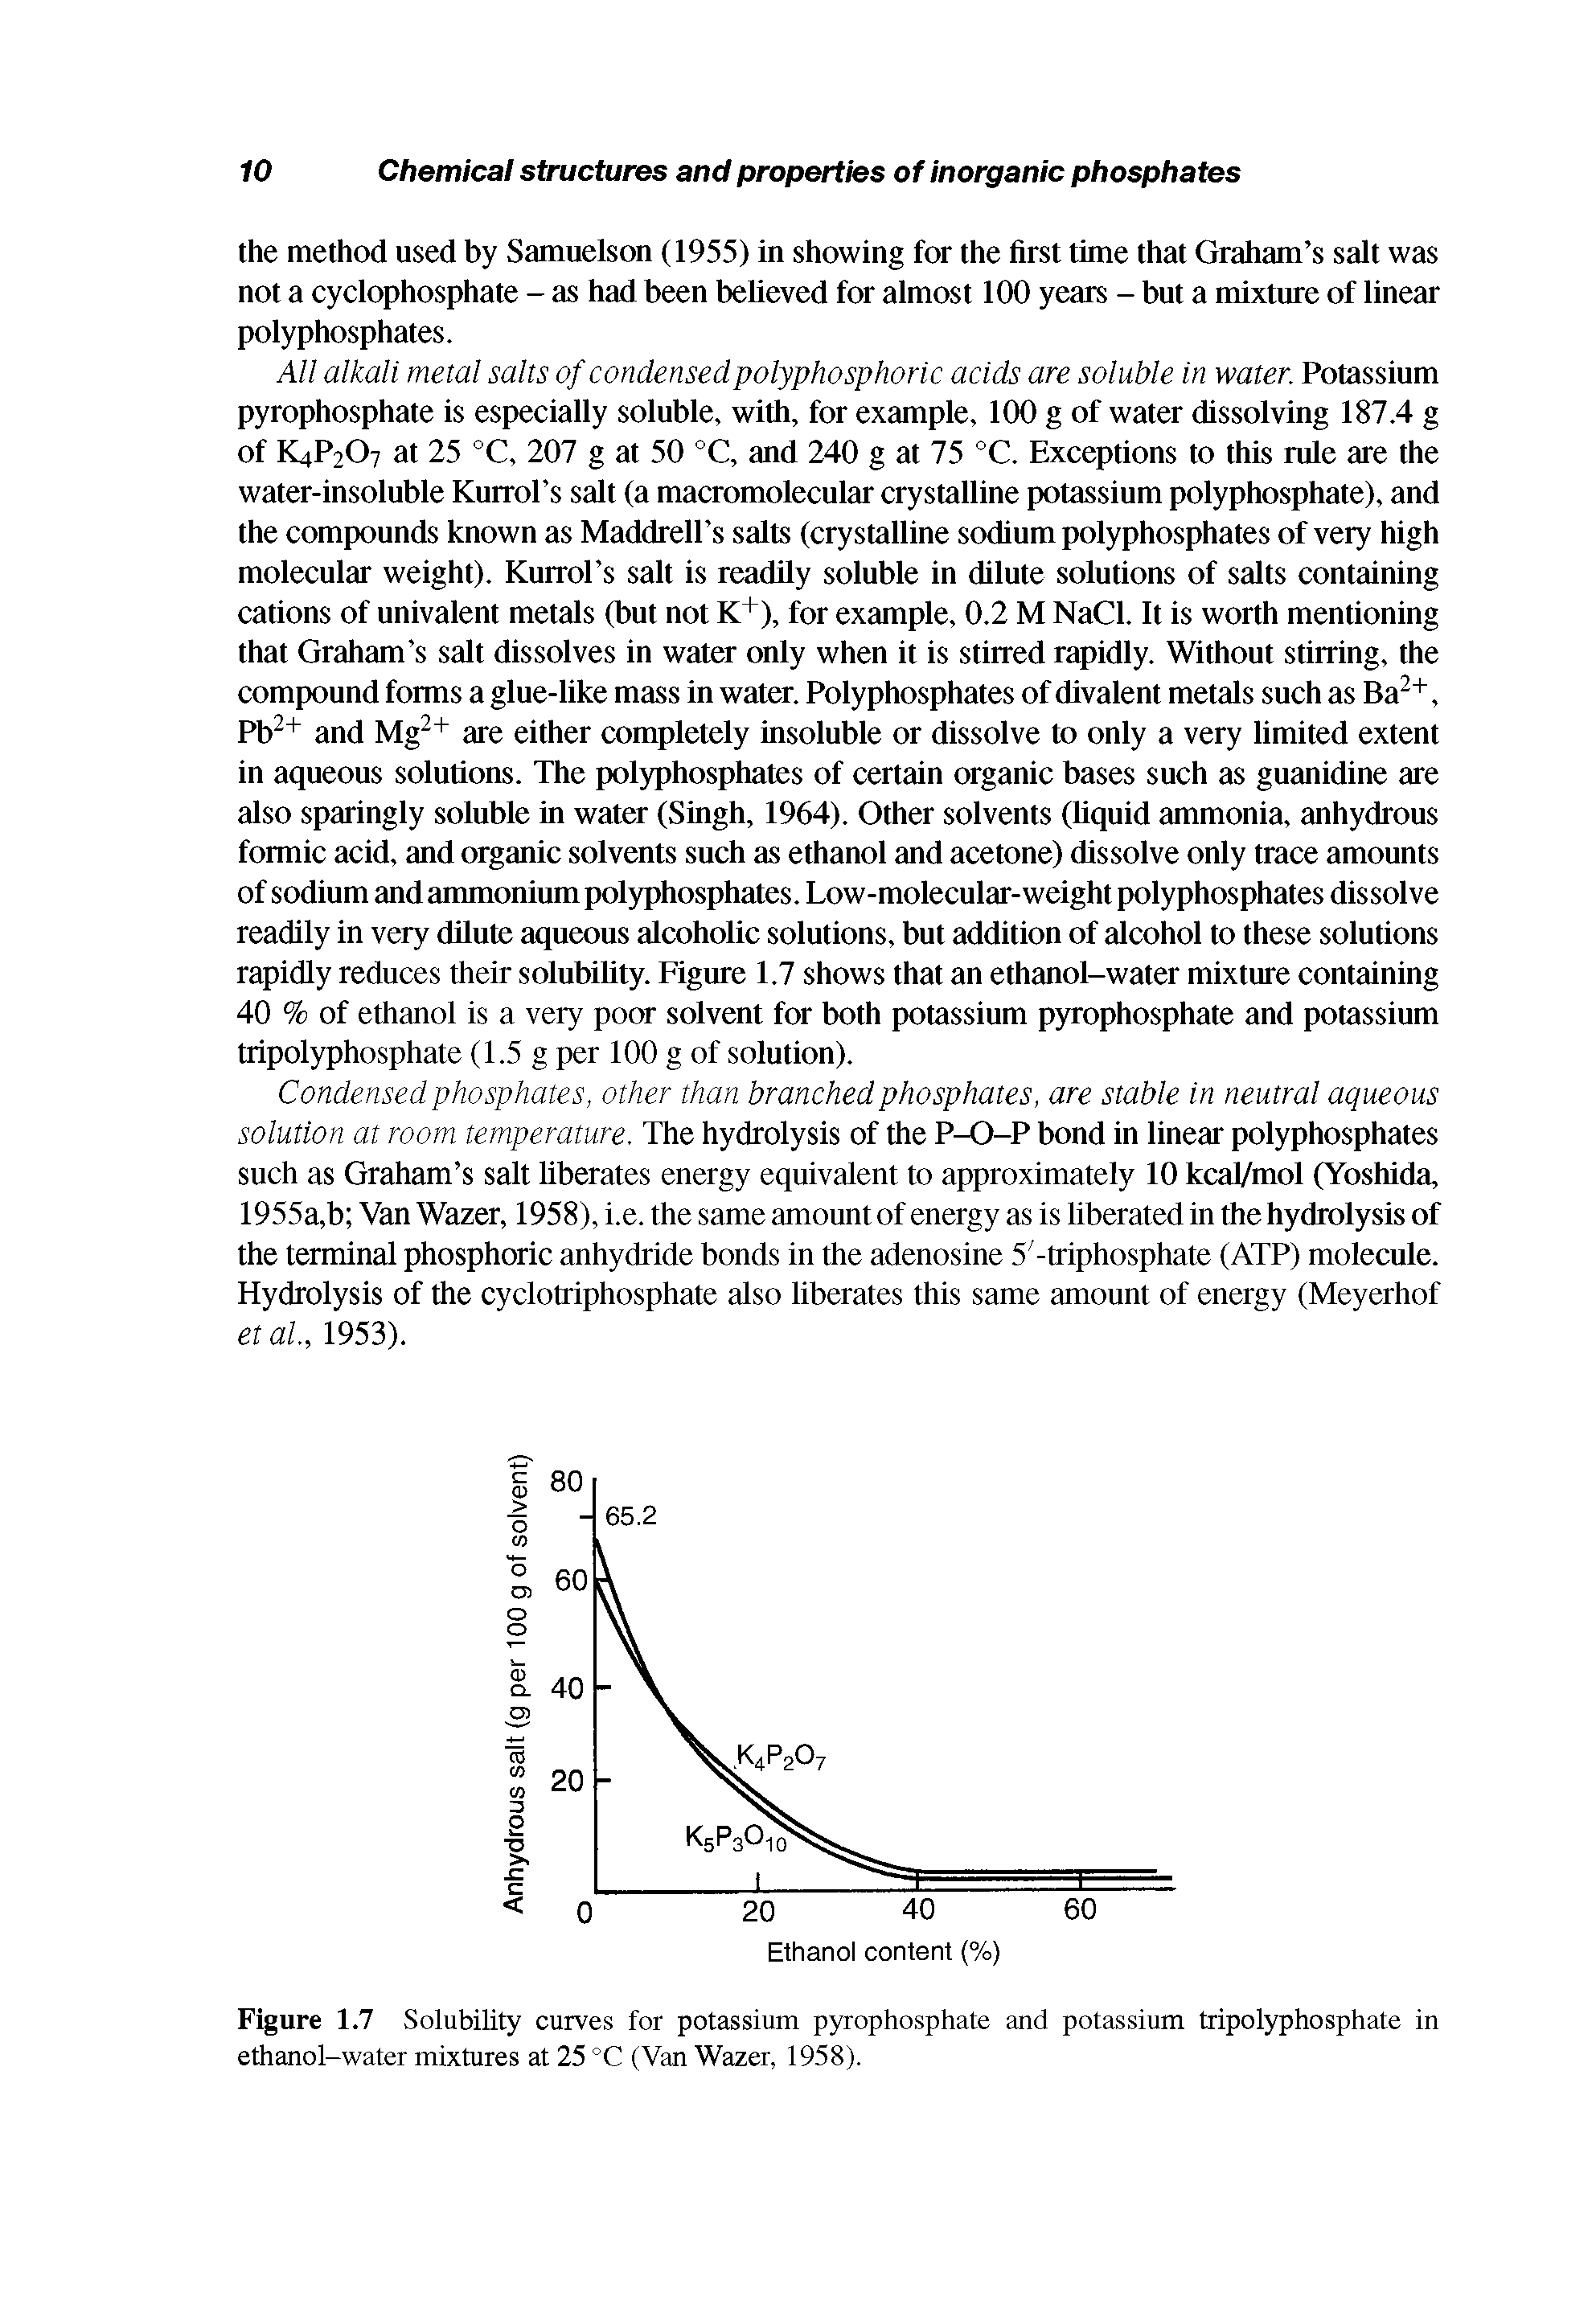 Figure 1.7 Solubility curves for potassium pyrophosphate and potassium tripolyphosphate in ethanol-water mixtures at 25 °C (Van Wazer, 1958).